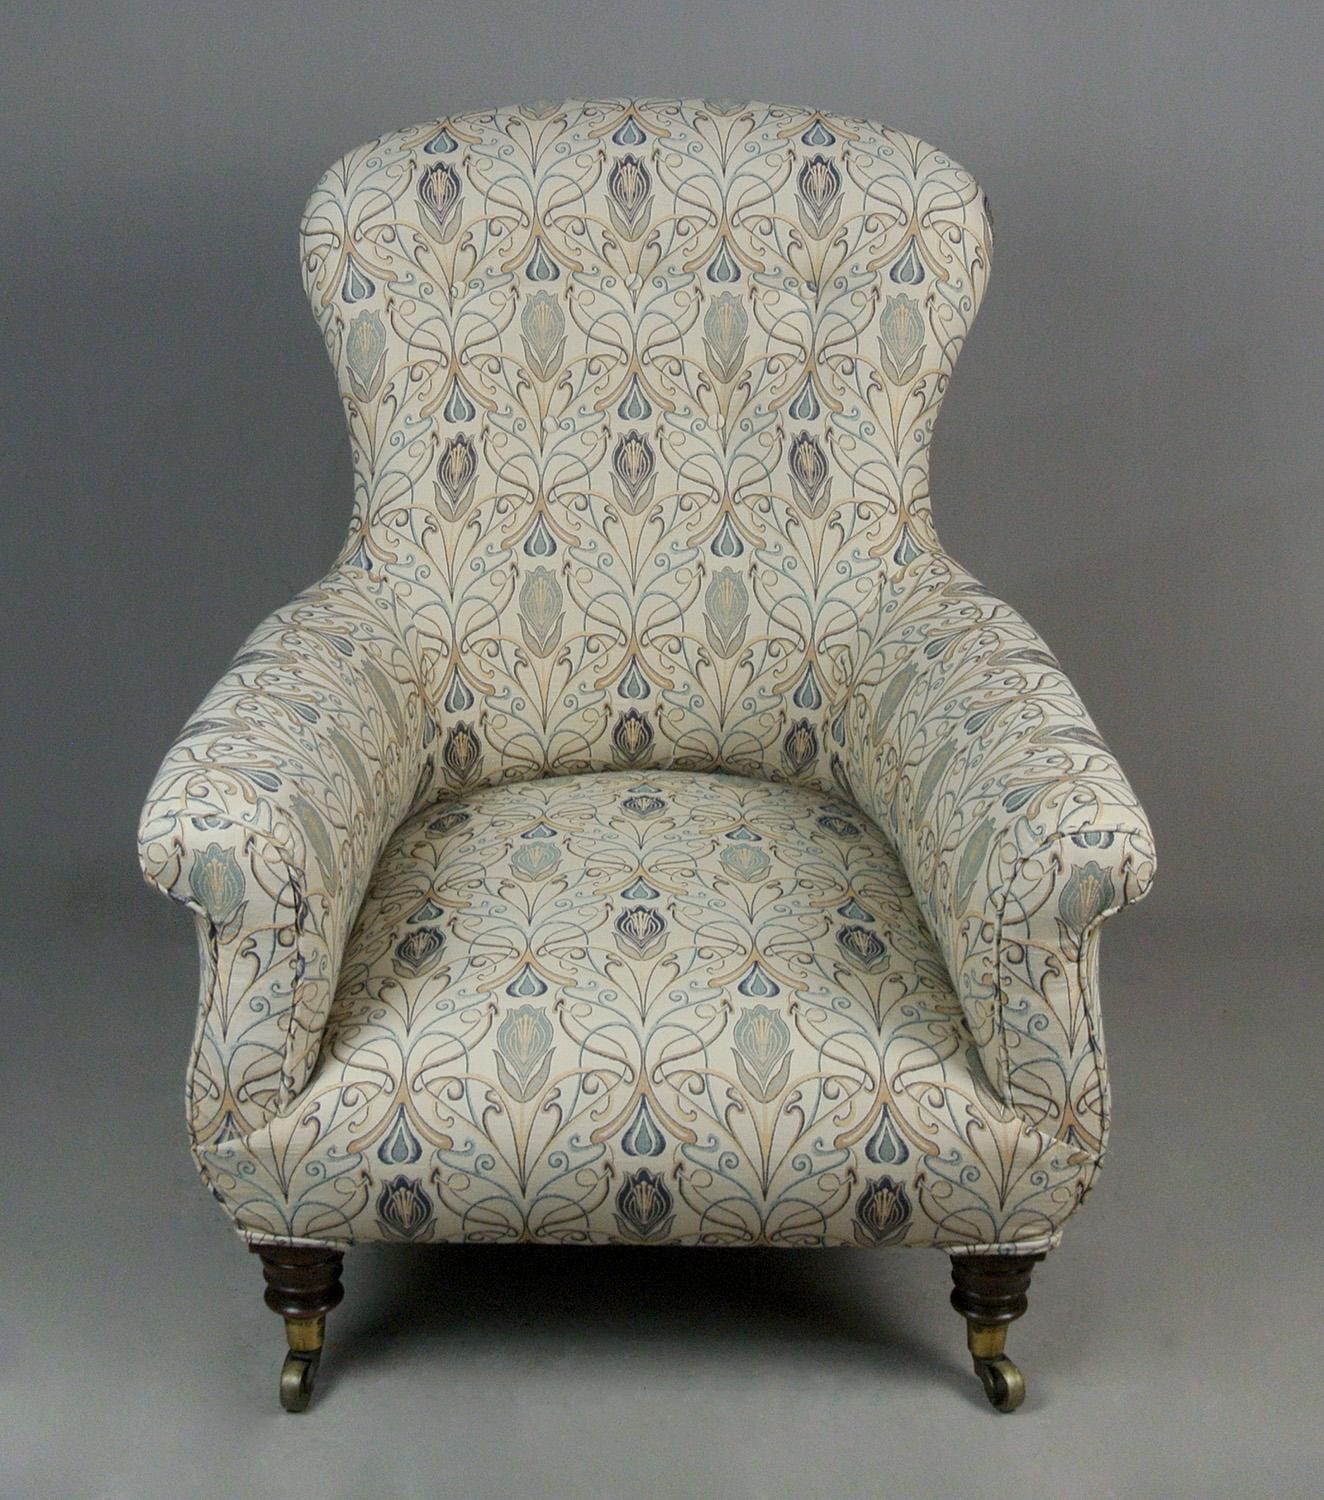 Newly upholstered in a heavyweight fabric of William Morris design, this beautiful and very comfortable 19th century arm chair has well turned mahogany front legs and sabre mahogany back legs all fitted with original solid brass large casters.

The